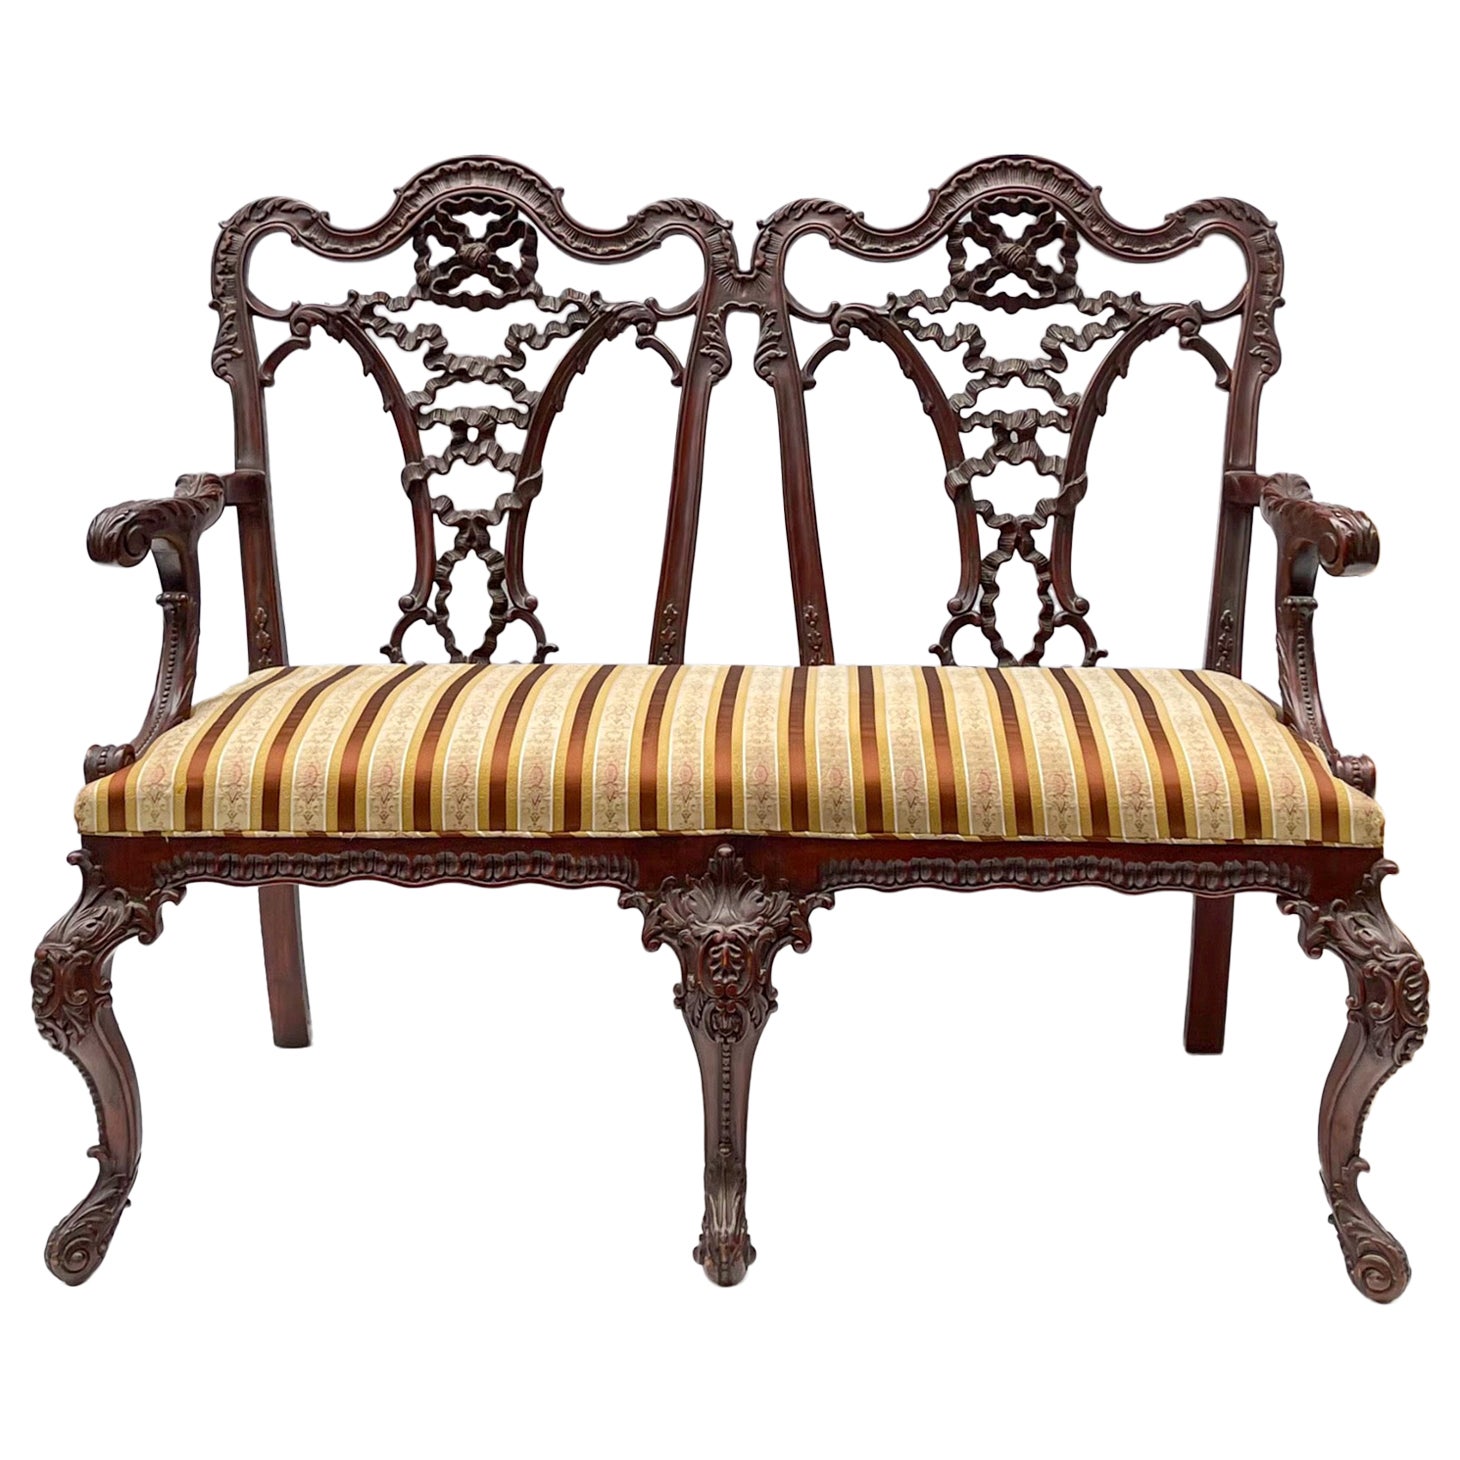 Early 20th-C. English Chinese Chippendale Style Carved Mahogany Settee / Bench  For Sale